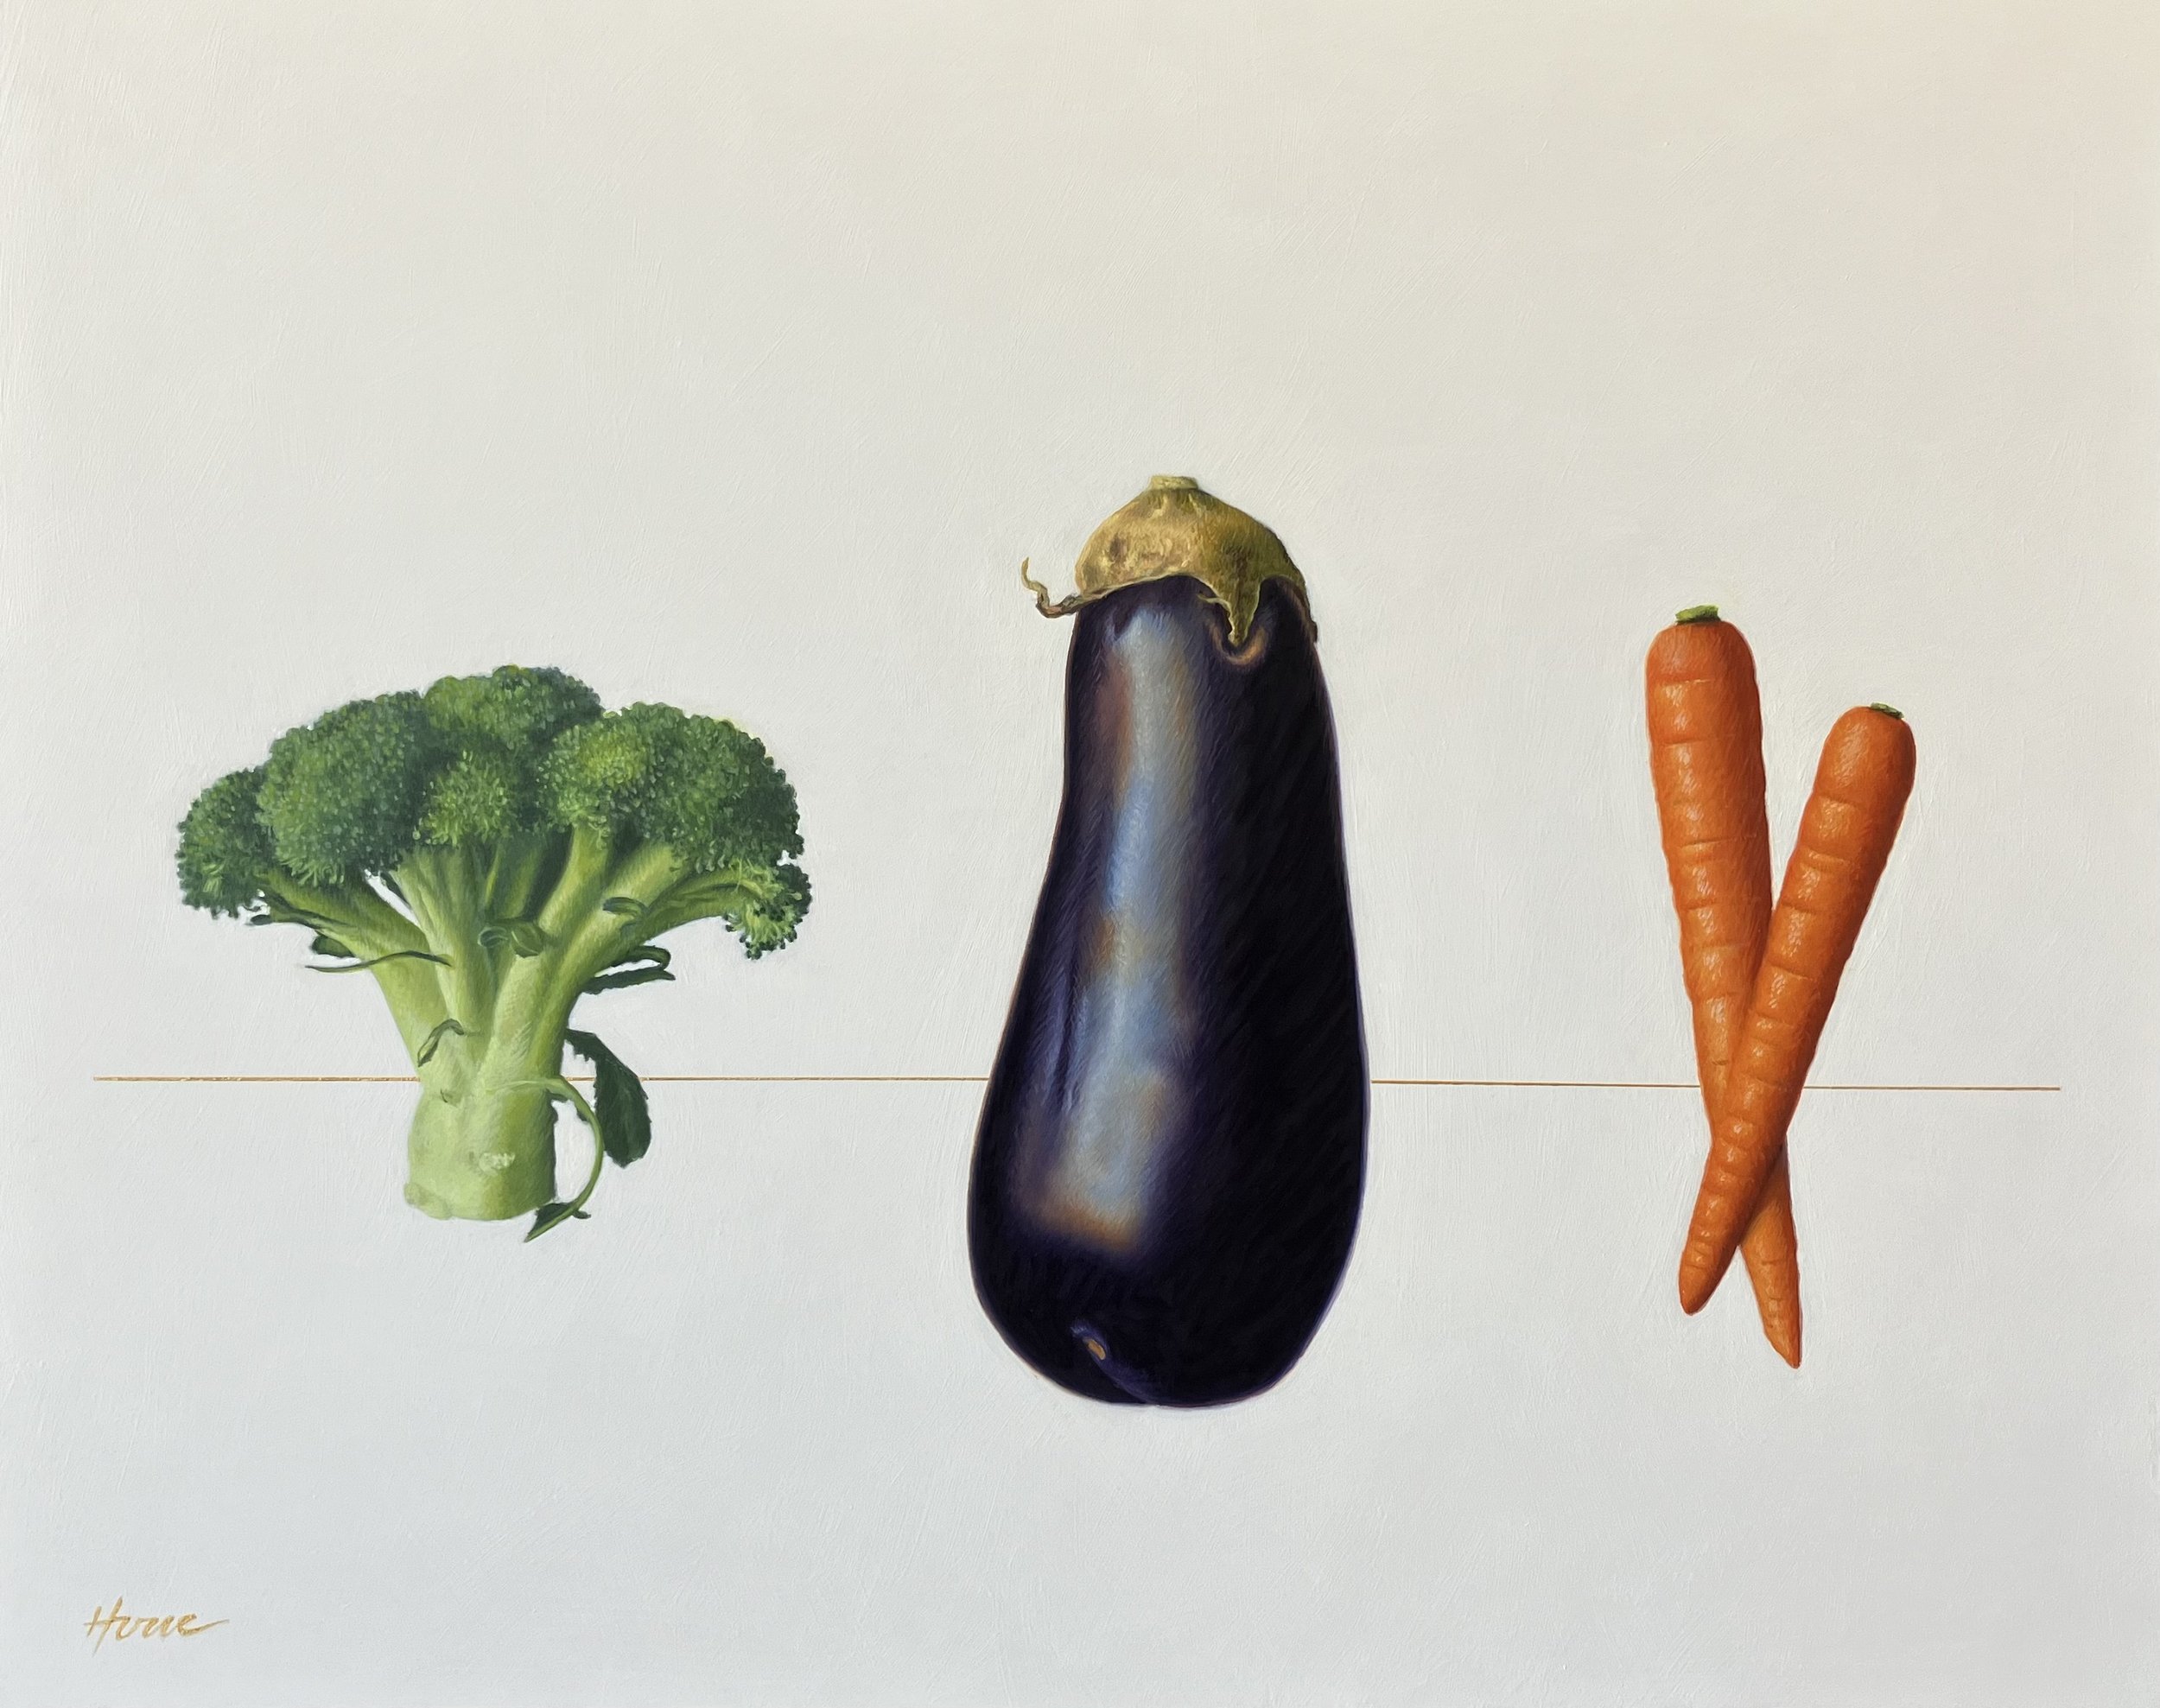 The Vegetables